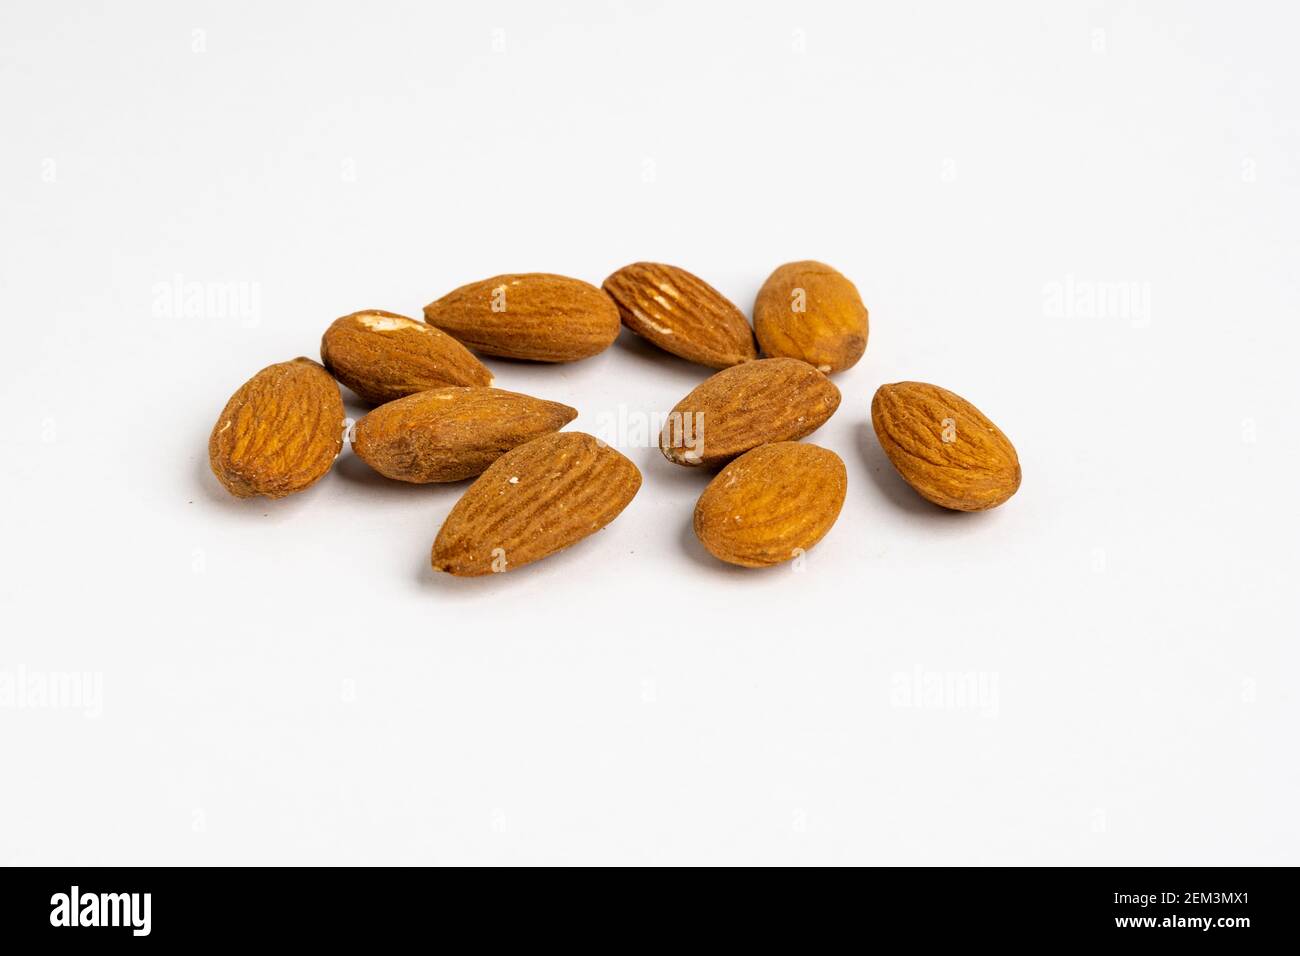 Heap of raw organic Californian almond nuts unshelled and without salt on a neutral background Stock Photo